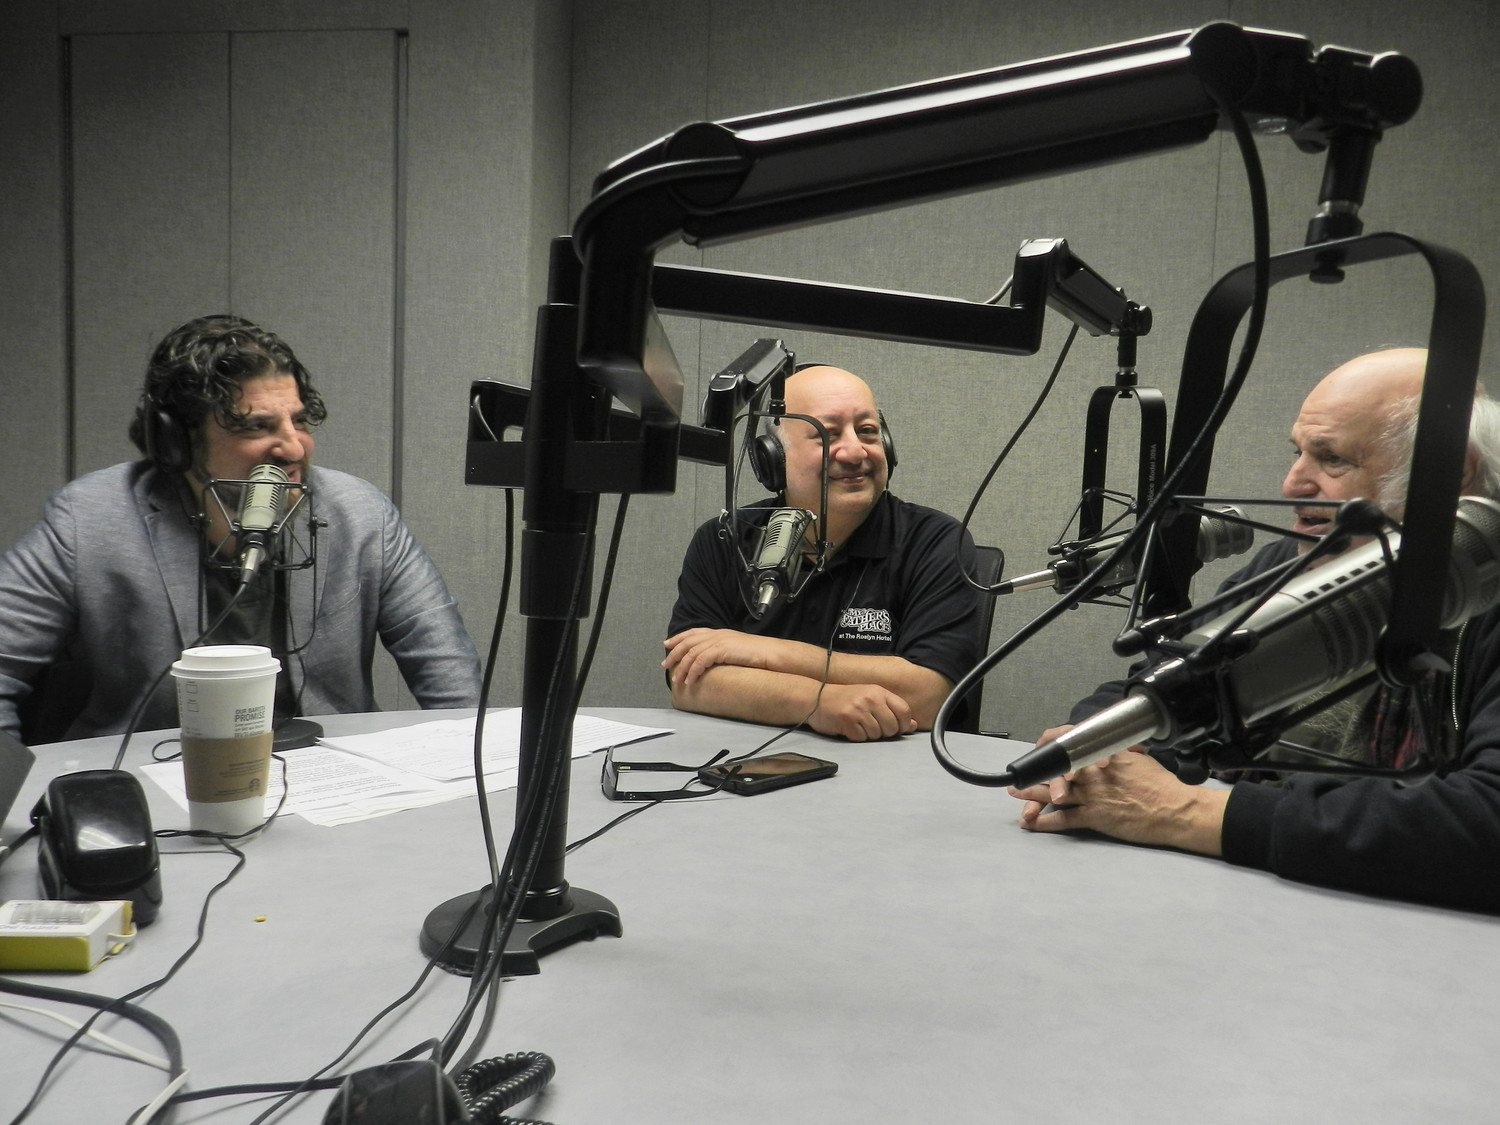 Jason Samel, far left, talked with Richard Solomon and Mike Epstein, who will be featured guests on his new radio show “North Shore Now.”